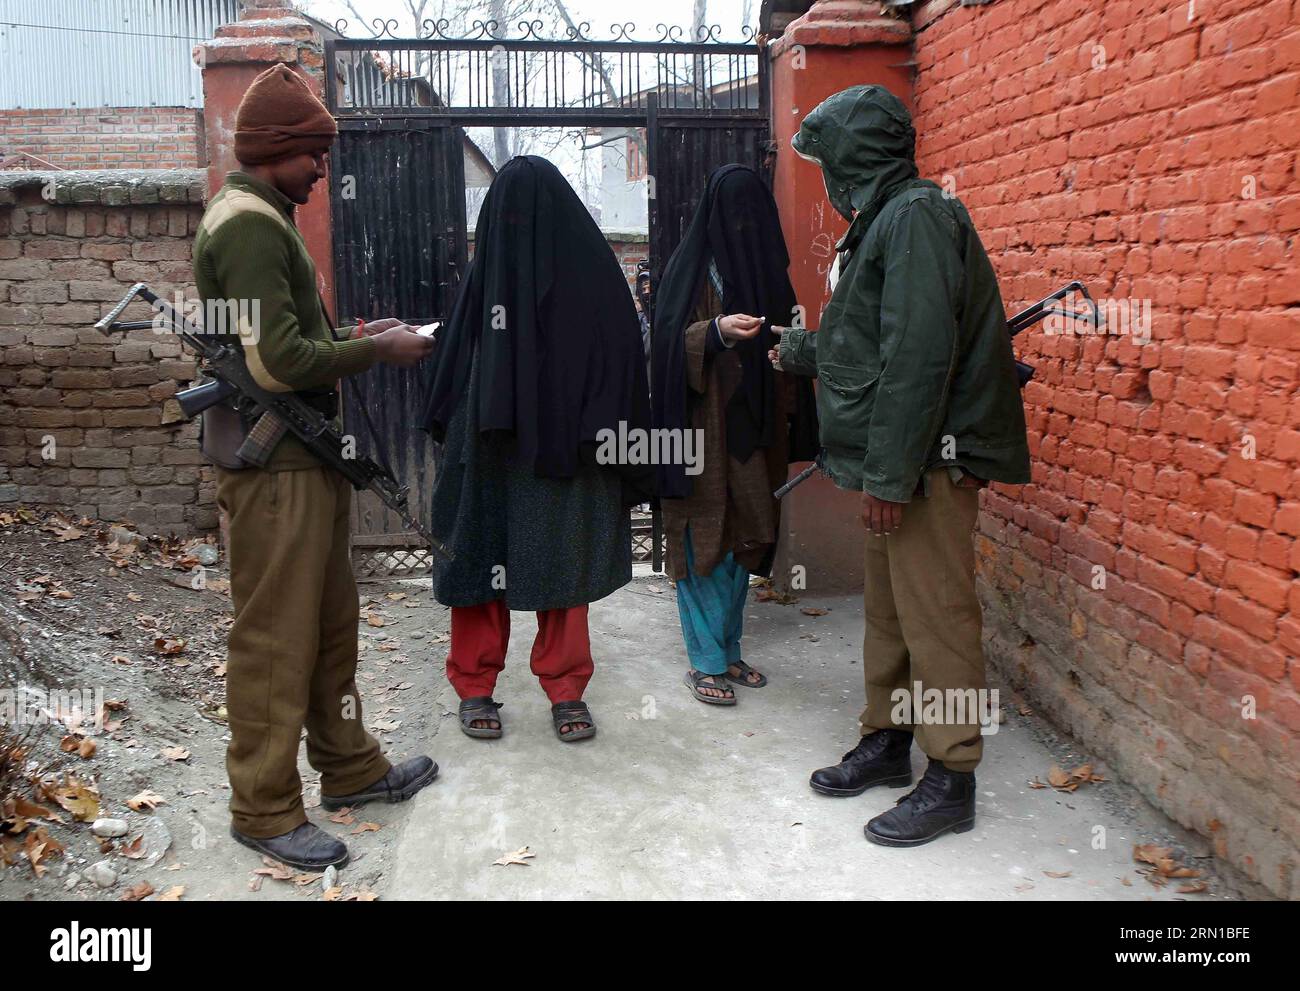 POLITIK Regionalwahlen in der Kaschmir-Region (141214) -- SRINAGAR, Dec. 14, 2014 -- Paramilitary troopers check voter cards of Kashmiri women outside a polling station in Anantnag district in Srinagar, the summer capital of Indian-controlled Kashmir, Dec. 14, 2014. Voting for the fourth phase of five-phase staggered local elections in restive Indian-controlled Kashmir began Sunday morning amid stringent security measures, officials said. ) (lmz) KASHMIR-SRINAGAR-POLLING JavedxDar PUBLICATIONxNOTxINxCHN   politics Regional elections in the Kashmir Region  Srinagar DEC 14 2014 paramilitary Troo Stock Photo